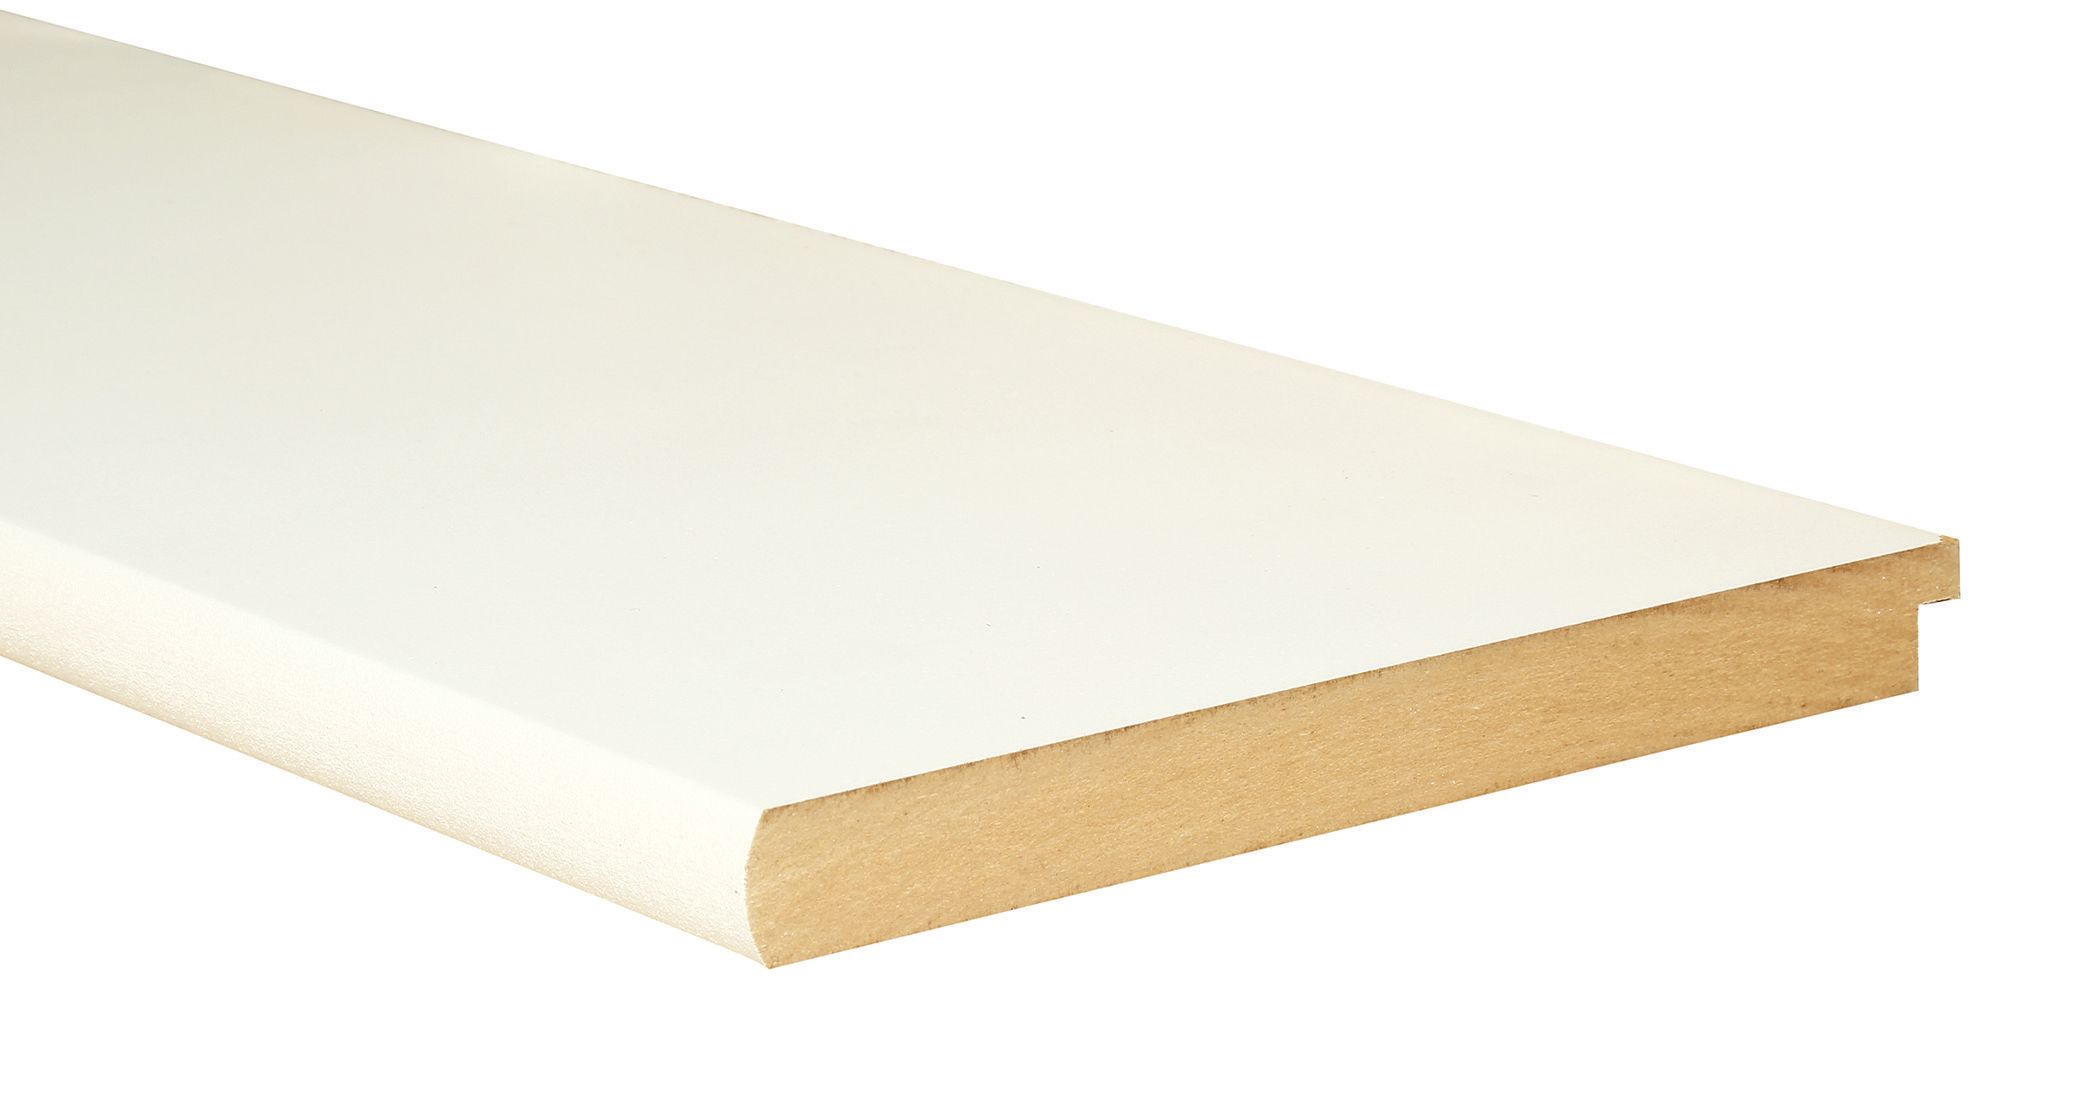 Image of Wickes Bullnose Primed MDF Window Board - 22mm x 219mm x 2100mm